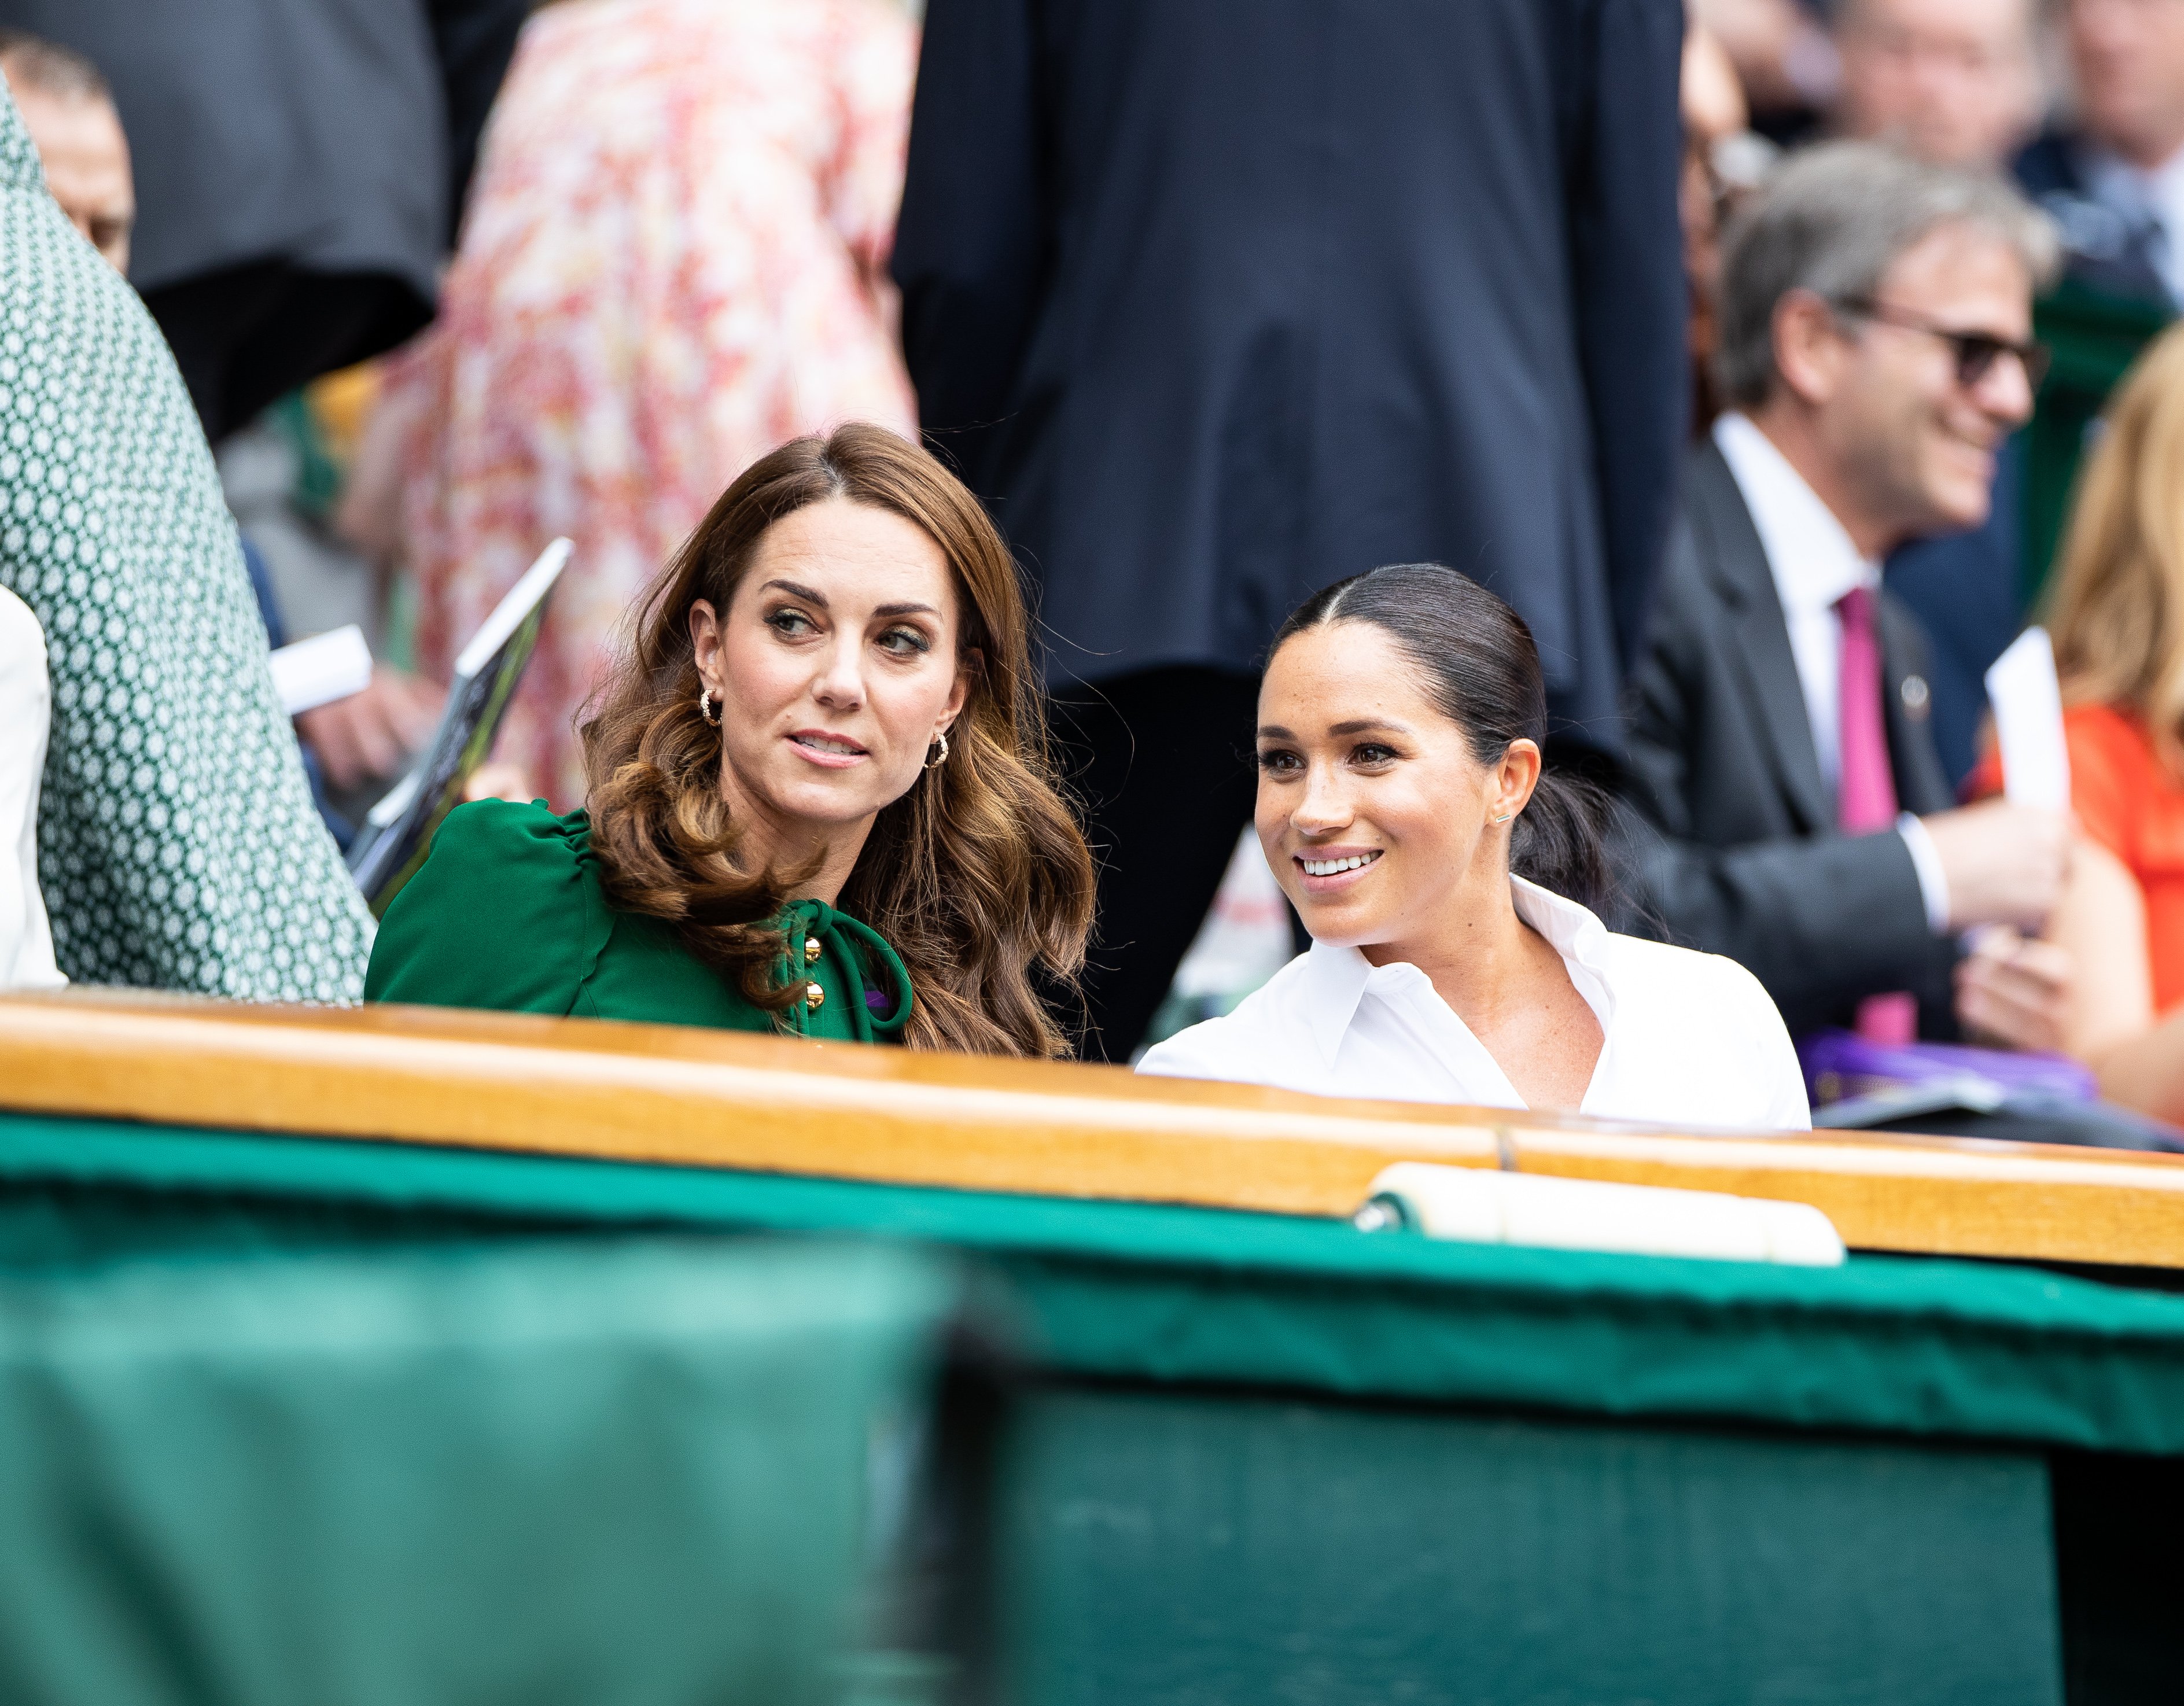 Kate Middleton, Duchess of Cambridge, talks with Meghan Markle, Duchess of Sussex in the royal box before the start of the Women's Singles Final at The Wimbledon Lawn Tennis Championship at the All England Lawn and Tennis Club at Wimbledon on July 13, 2019 | Photo: Getty Images